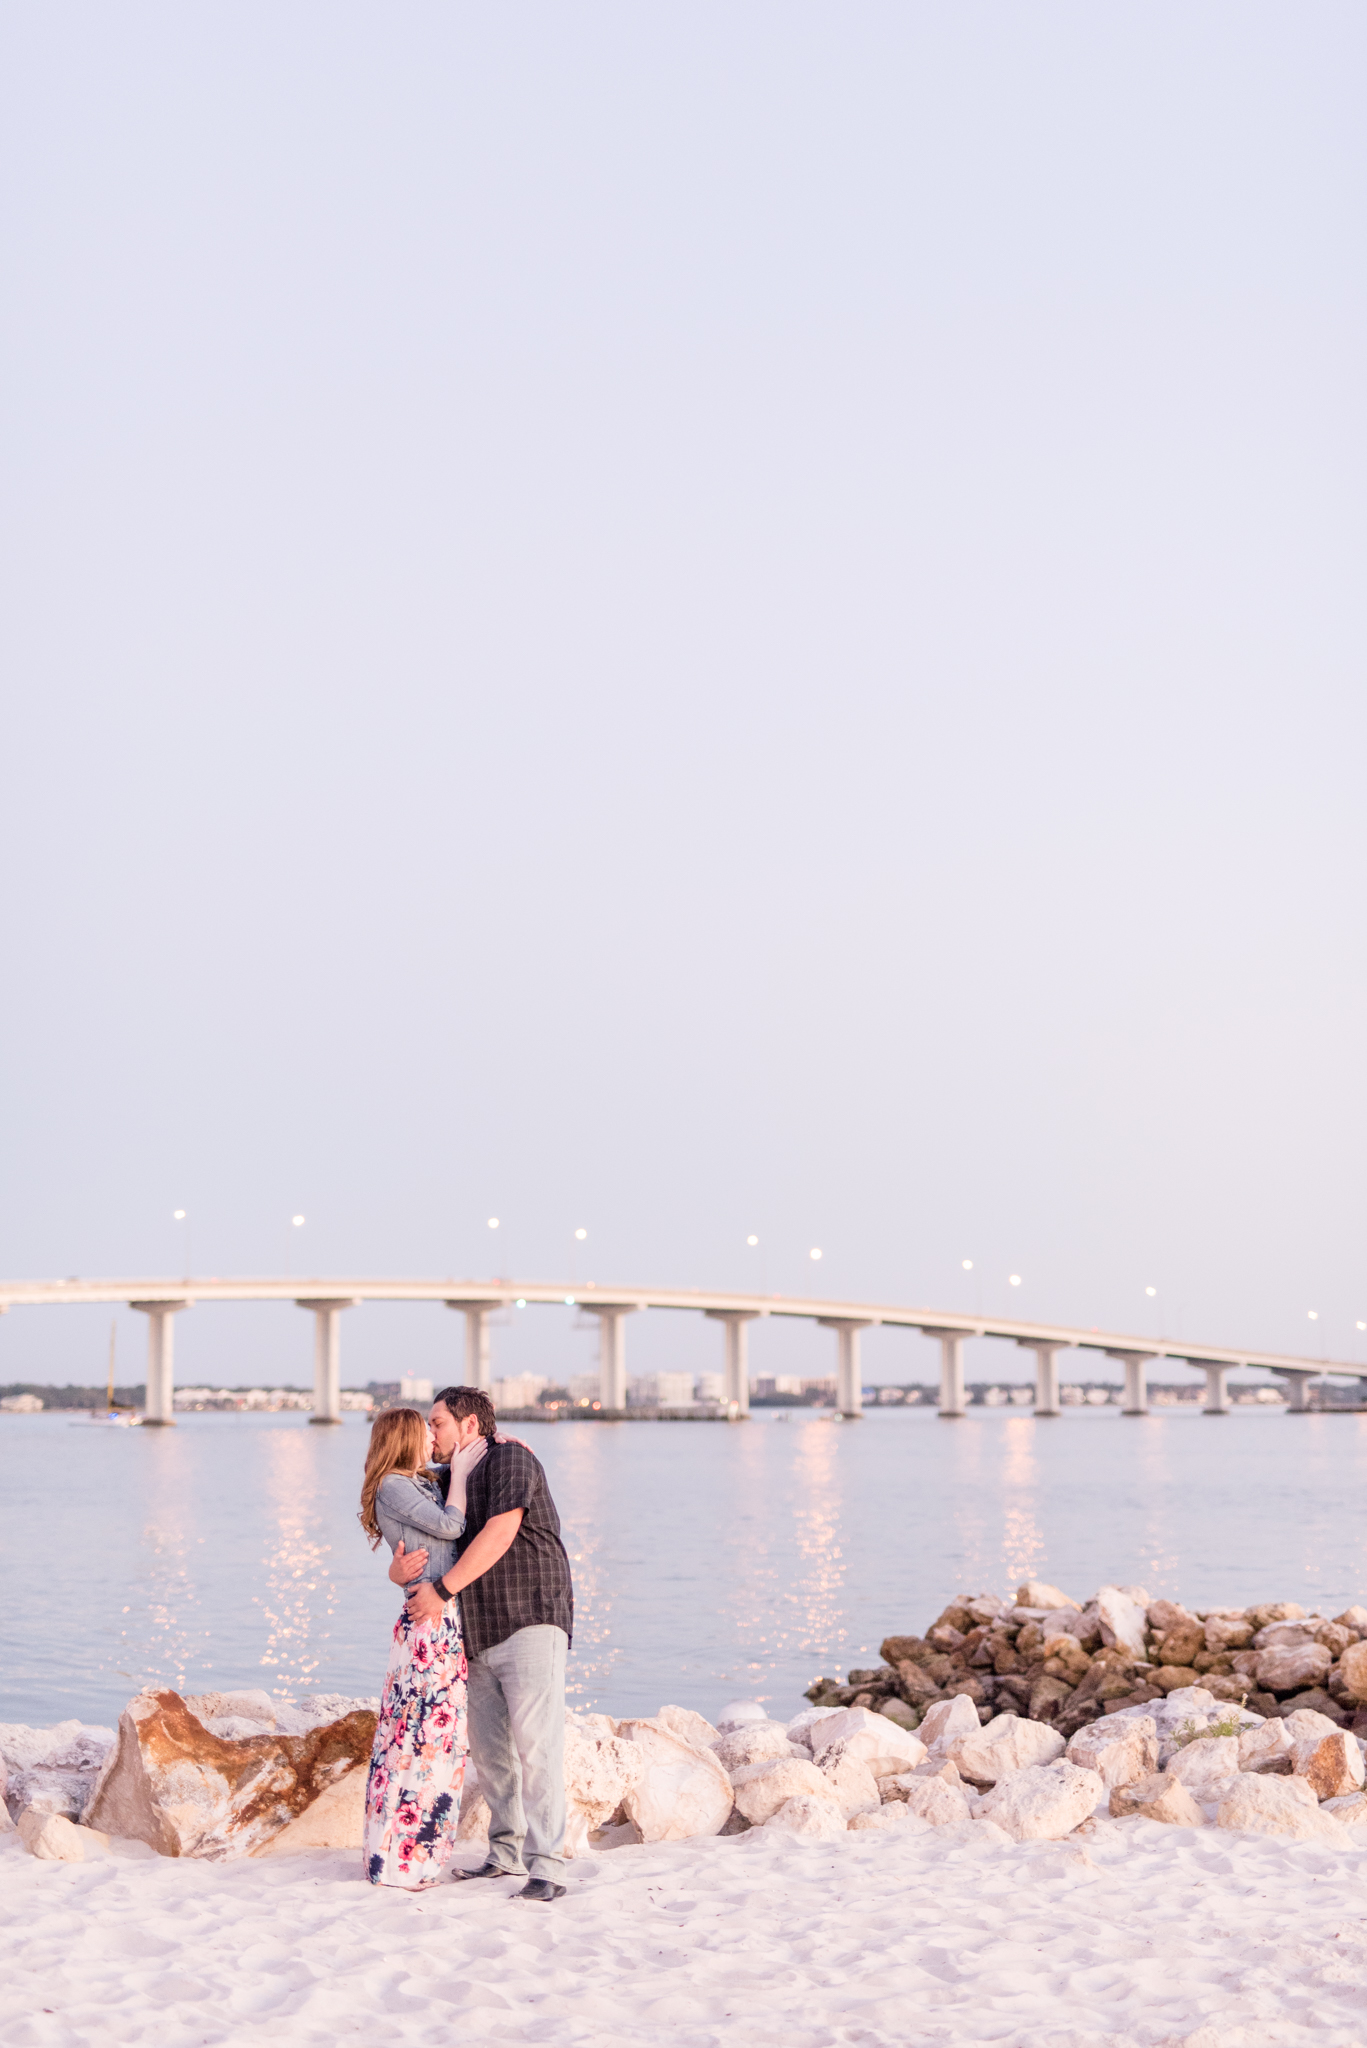 Couple kisses in front of large bridge.